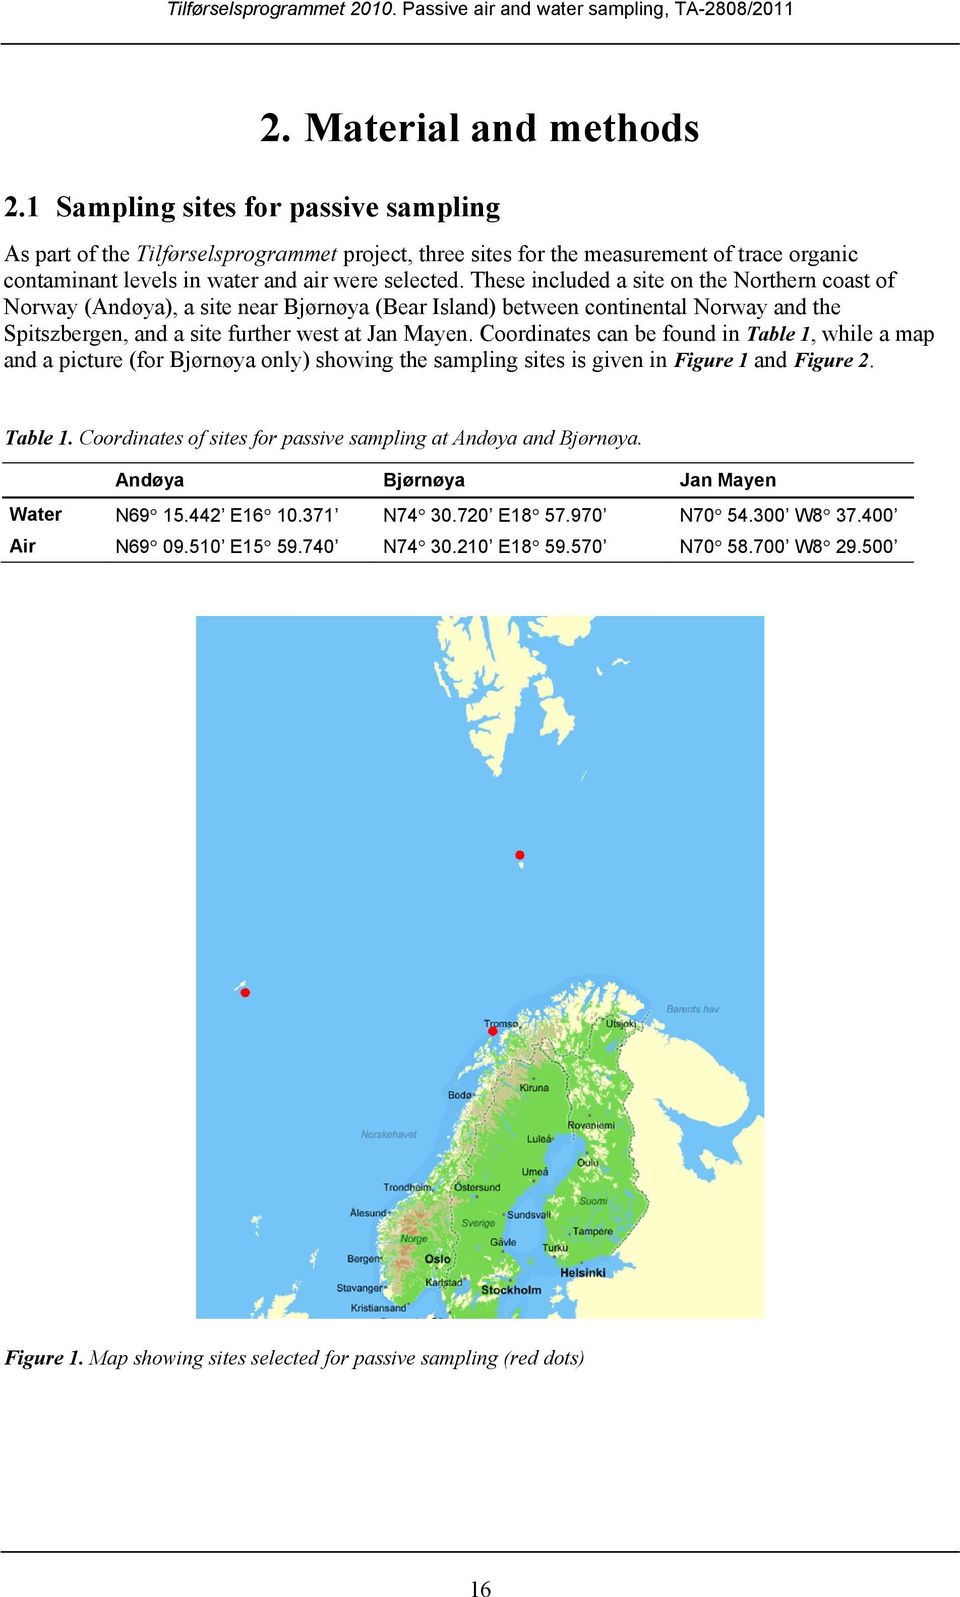 These included a site on the Northern coast of Norway (Andøya), a site near Bjørnøya (Bear Island) between continental Norway and the Spitszbergen, and a site further west at Jan Mayen.